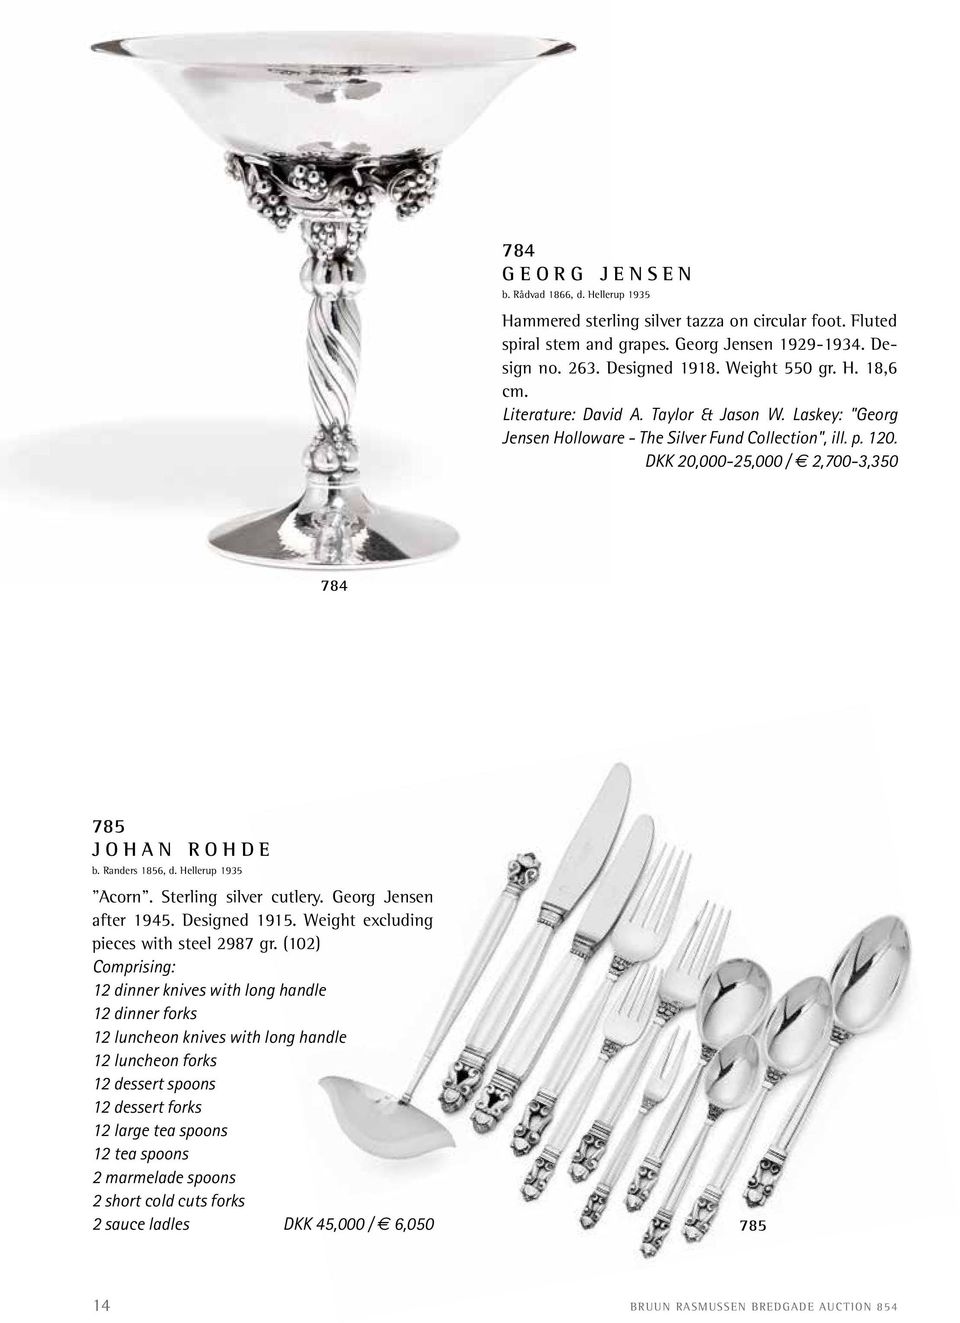 Hellerup 1935 "Acorn". Sterling silver cutlery. Georg Jensen after 1945. Designed 1915. Weight excluding pieces with steel 2987 gr.